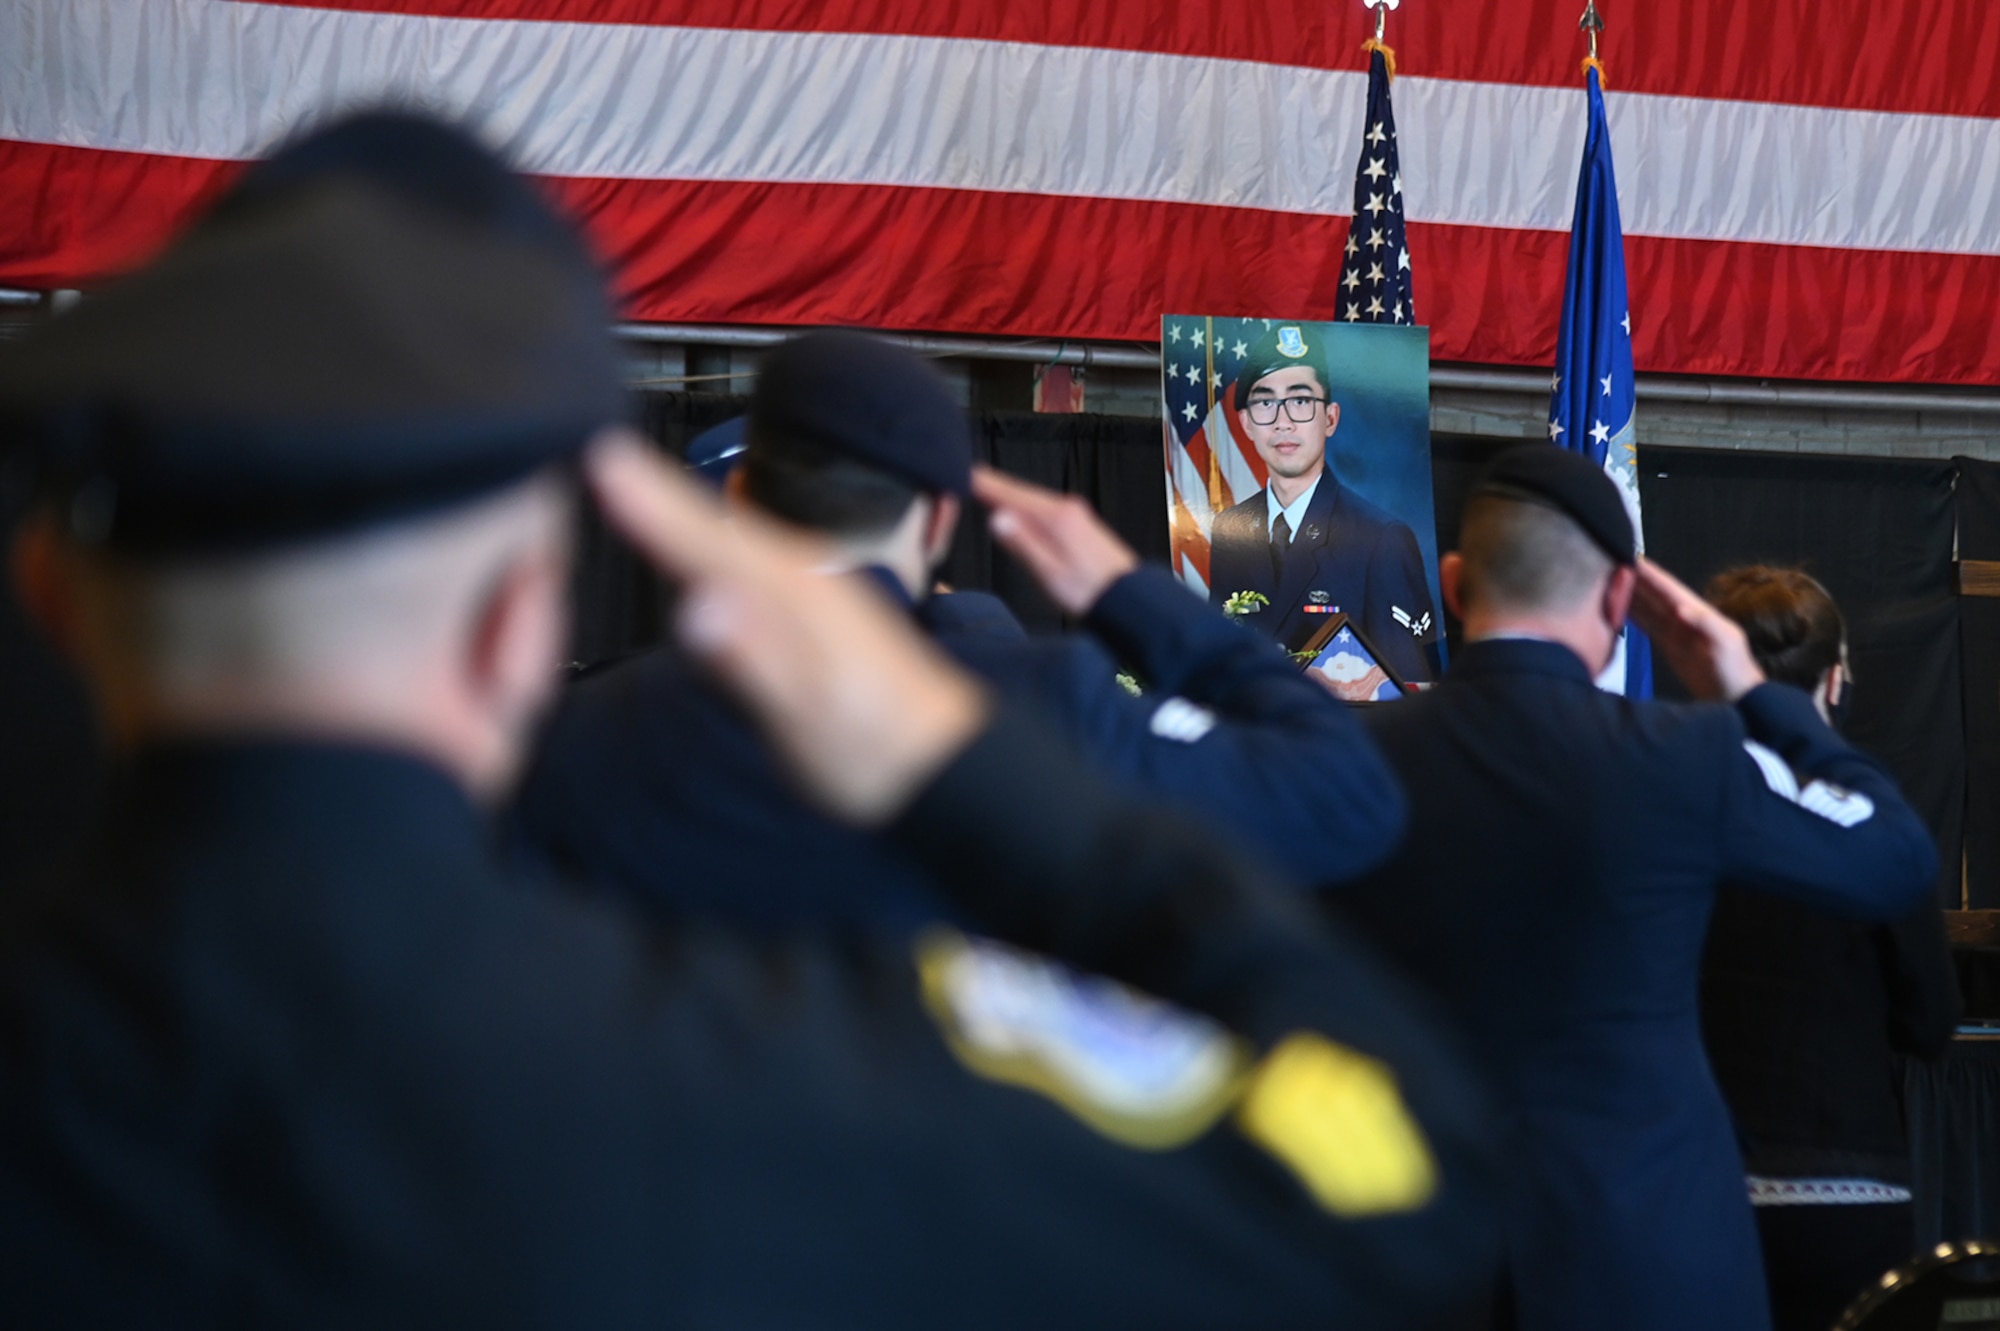 Members of the 66th Security Forces Squadron salute during Senior Airman Jason “Khai” Phan’s memorial service at Hanscom Air Force Base, Mass., Oct. 16. During the ceremony, wingmen remembered the fallen Airman, who died in a non-combat incident Sept. 12 while serving overseas. (U.S. Air Force photo by Linda LaBonte Britt)